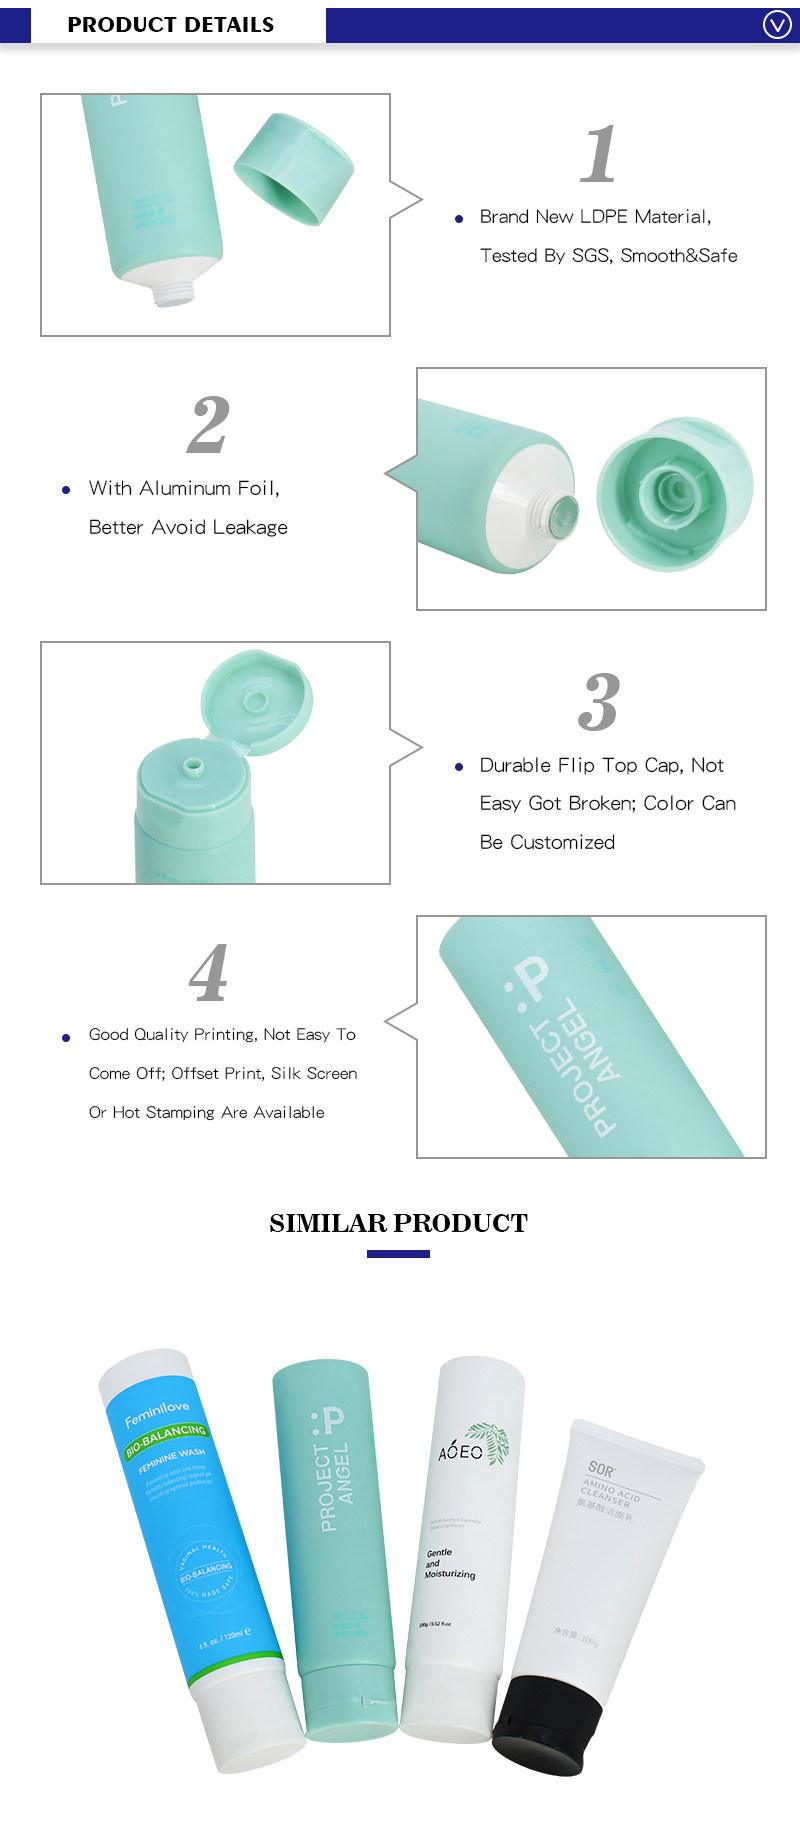 Eco-Friendly Factory Supply Plastic 100 Ml Blue Cosmetic Packaging Plastic Tube